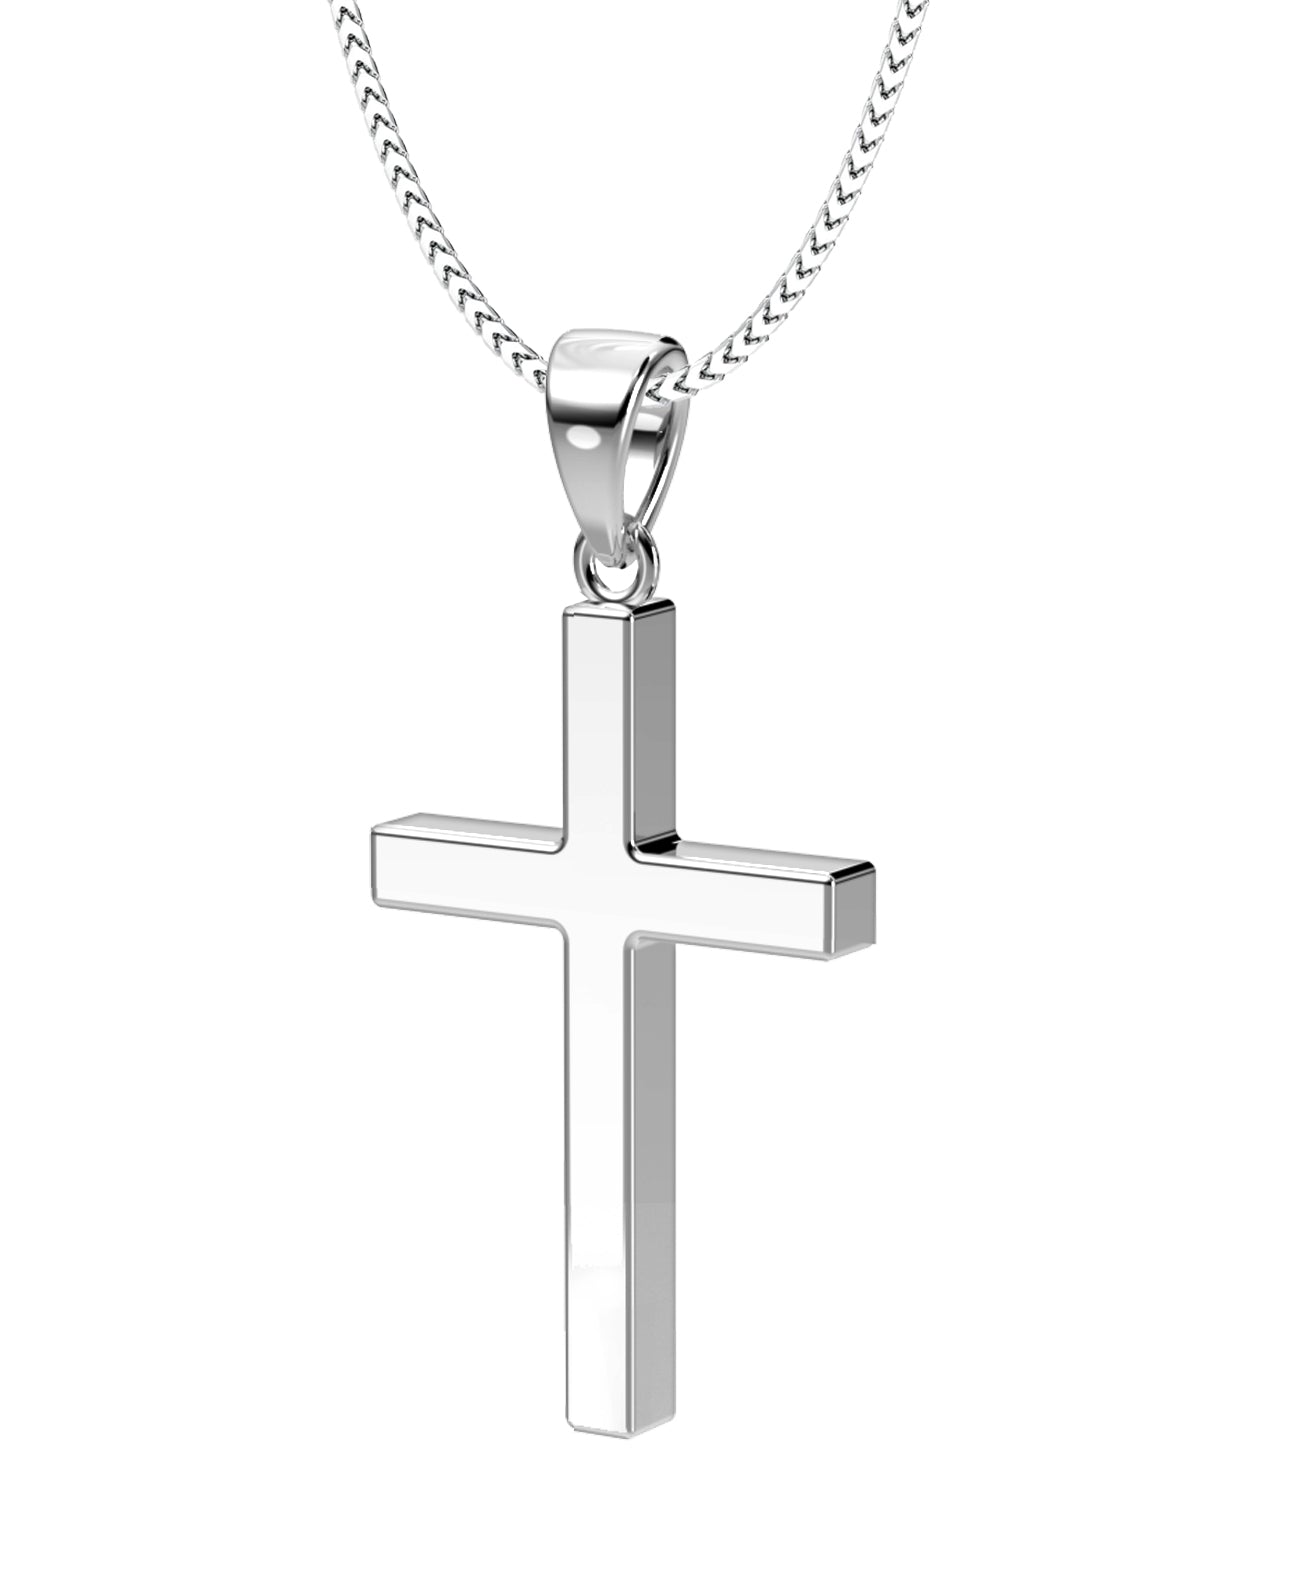 Cross Necklace for Men, Stainless Steel Silver Layered Initial F Letter Cross  Pendant Necklaces Chain for Men Boys, Initial Cross Necklace Cuban Link  Chain for Men Women Boys Girls Jewelry Gifts |